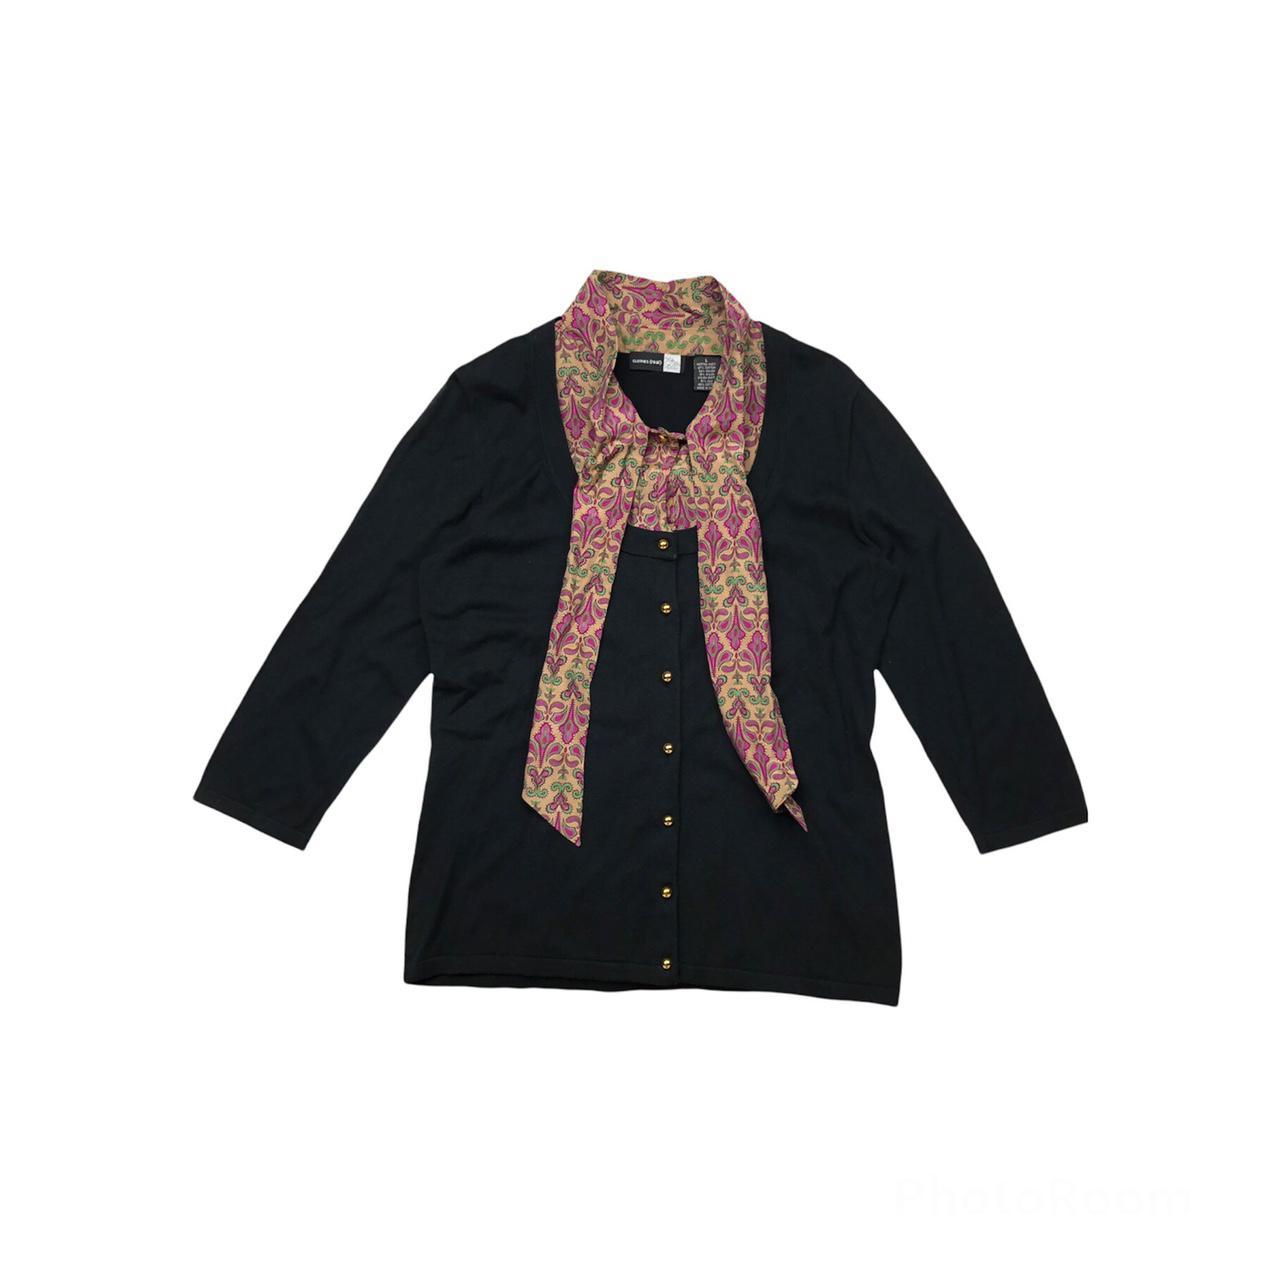 Product Image 2 - Paisley black pussy bow blouse

Brand: